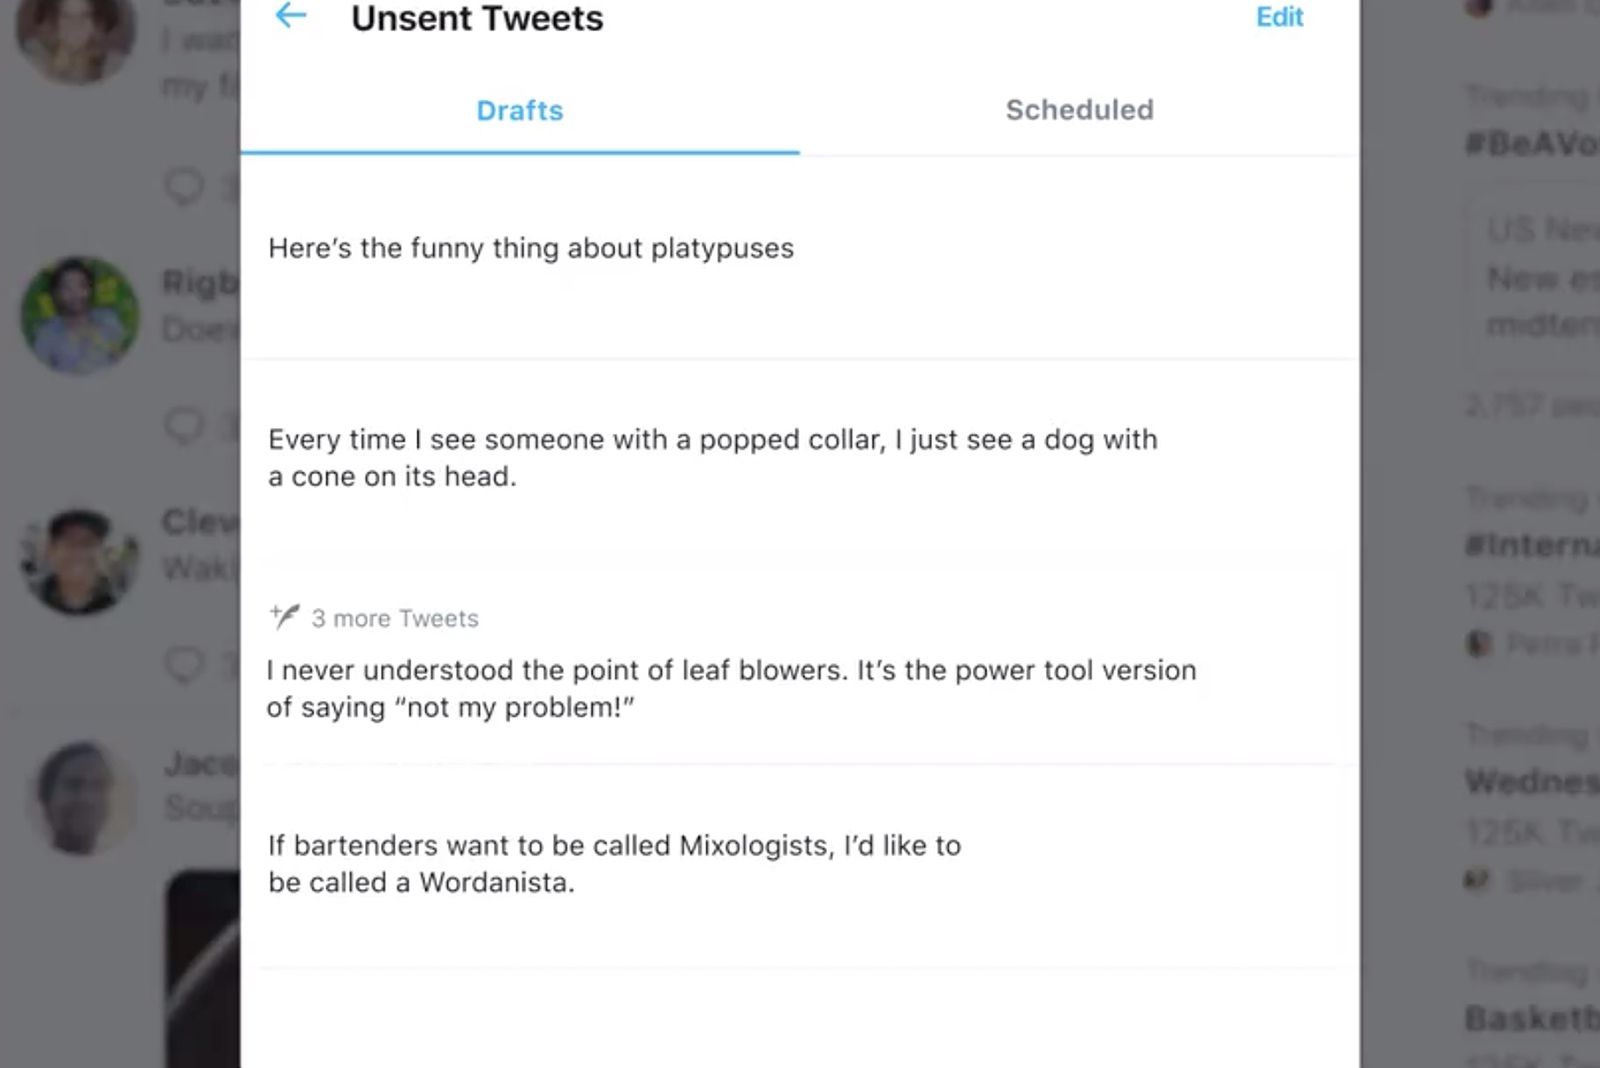 How to save a tweet draft and schedule a tweet on Twitter